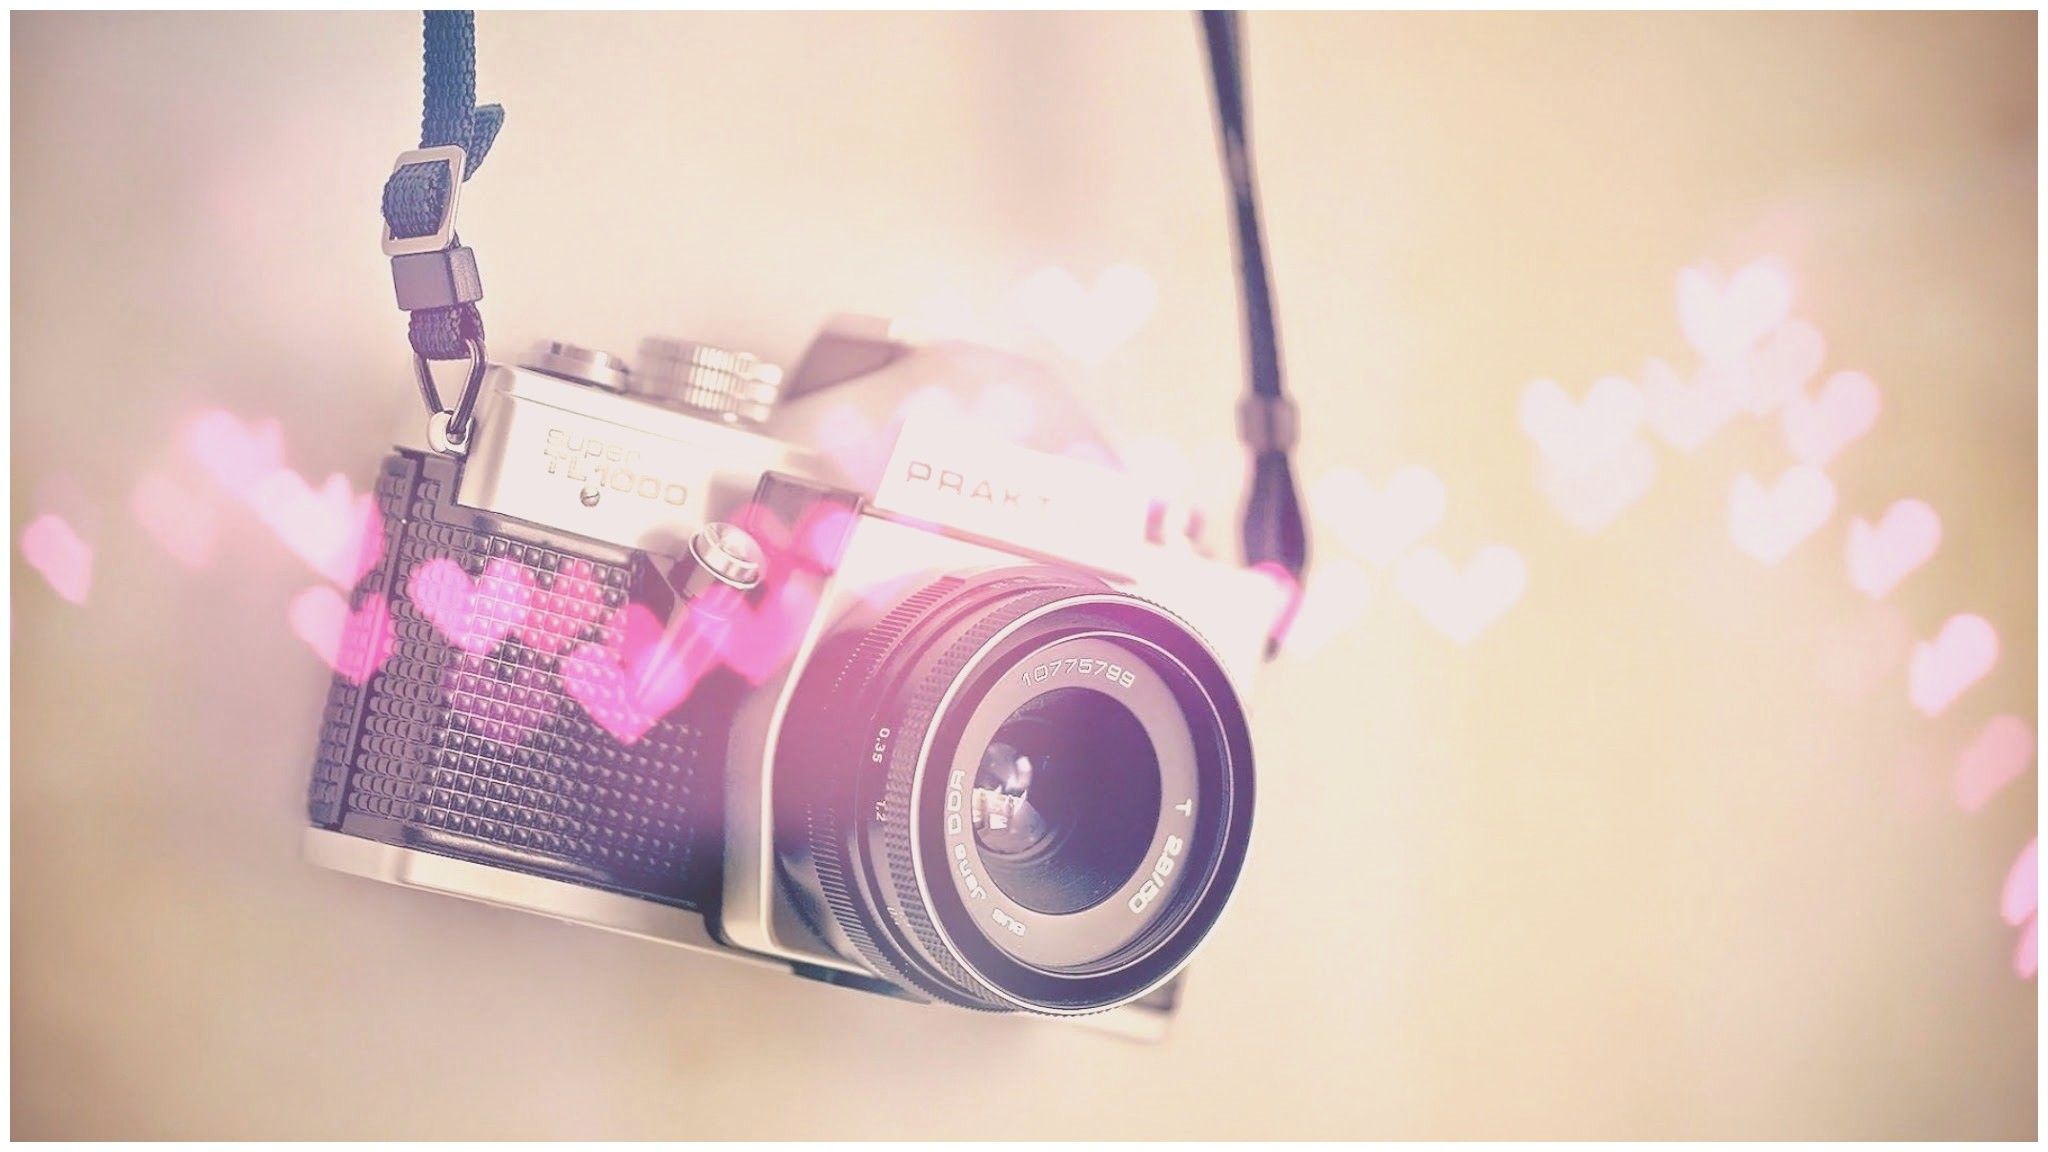 Cute Girly Background For Facebook Wallpaper For A Laptop